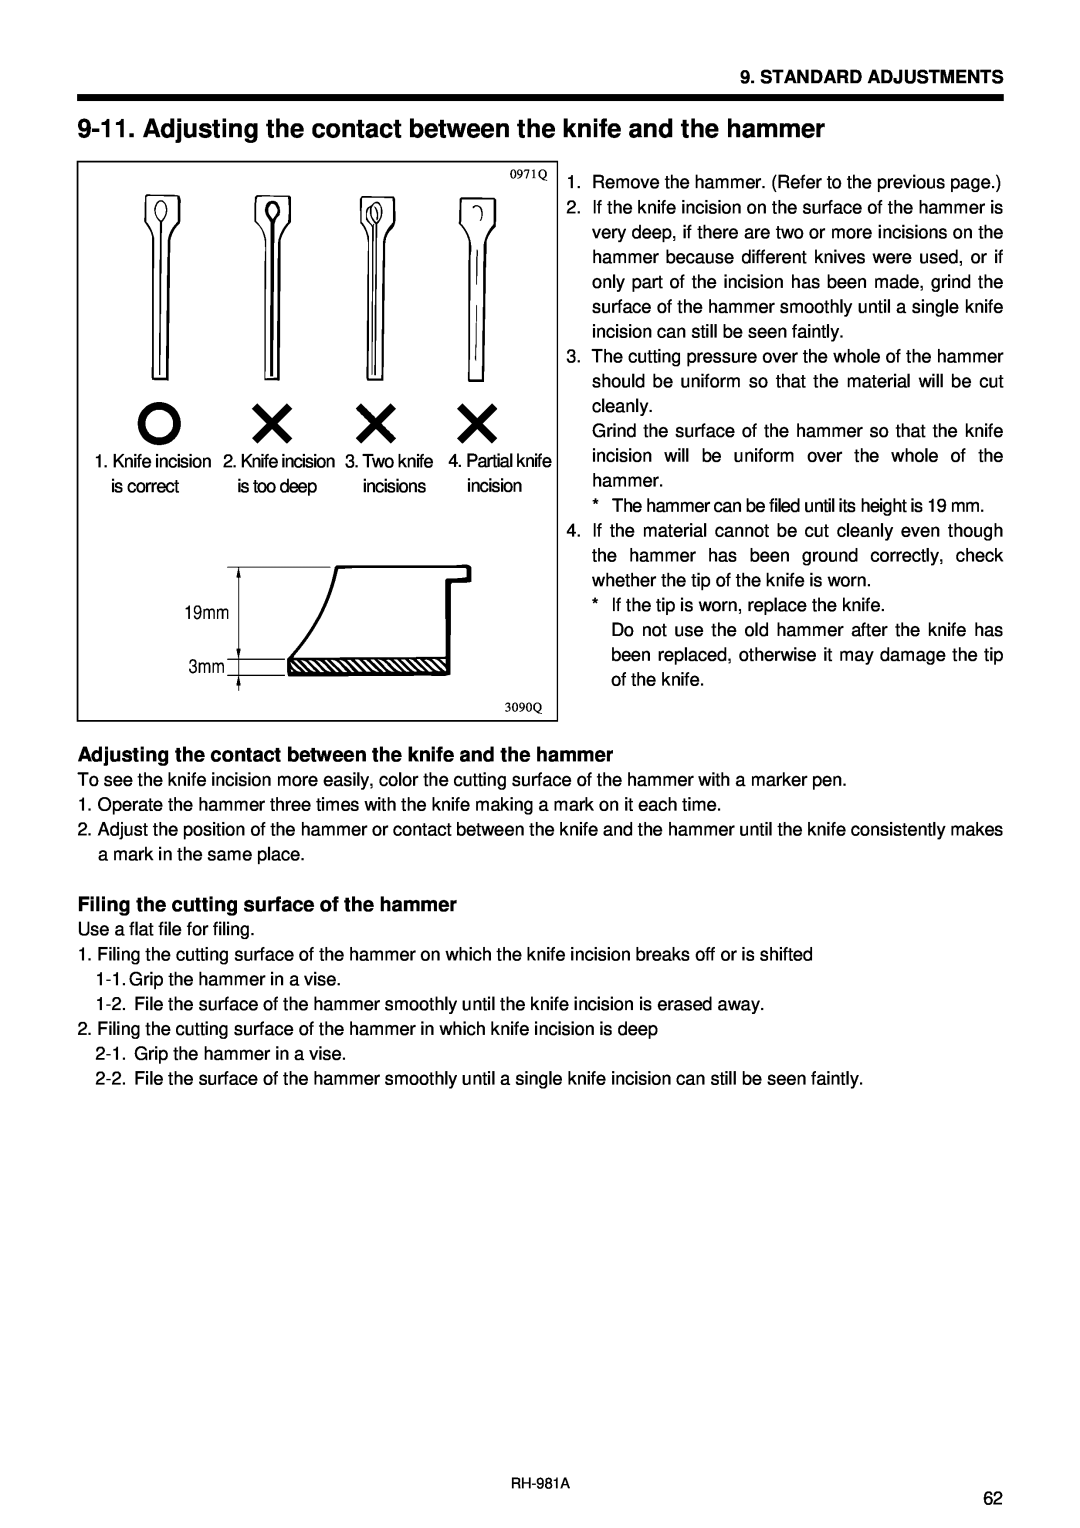 Brother rh-918a manual Adjusting the contact between the knife and the hammer, Filing the cutting surface of the hammer 